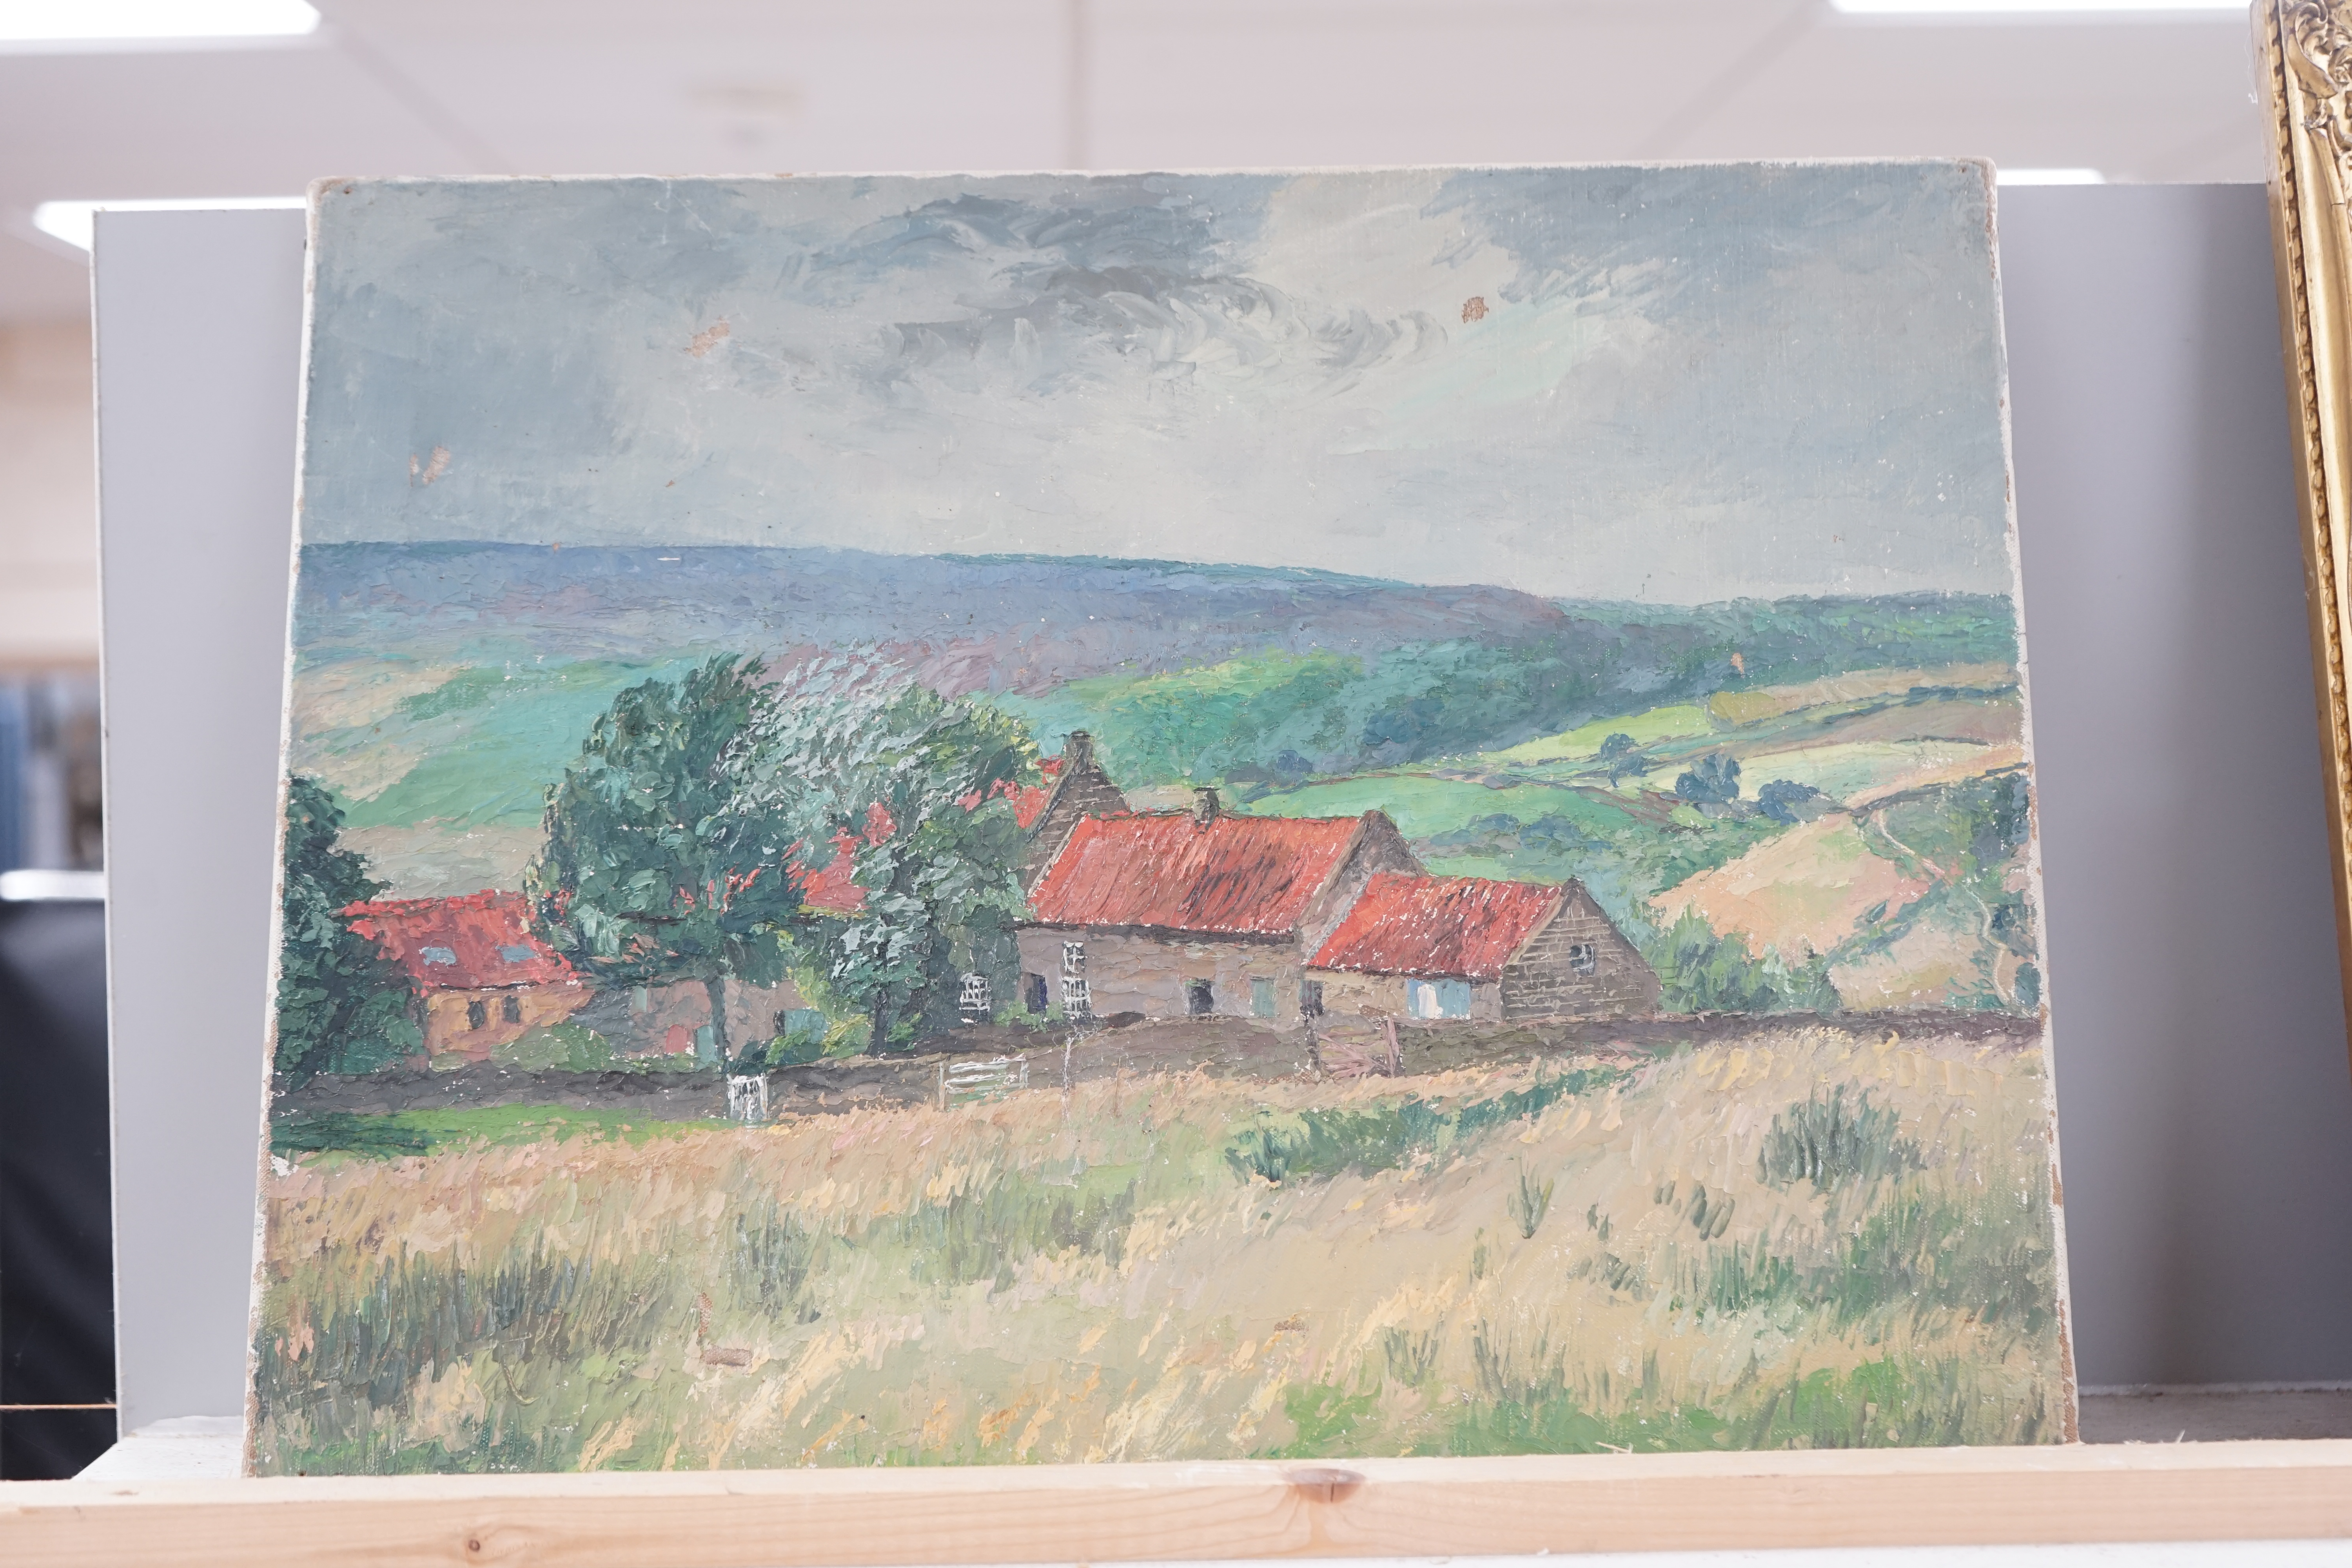 Henry (Harry) Clarence Whaite (1895-1978), oil on canvas, ‘Farm buildings, Goathland Common, Yorkshire’, unframed, 36 x 45cm. Condition - poor, a few holes to the canvas